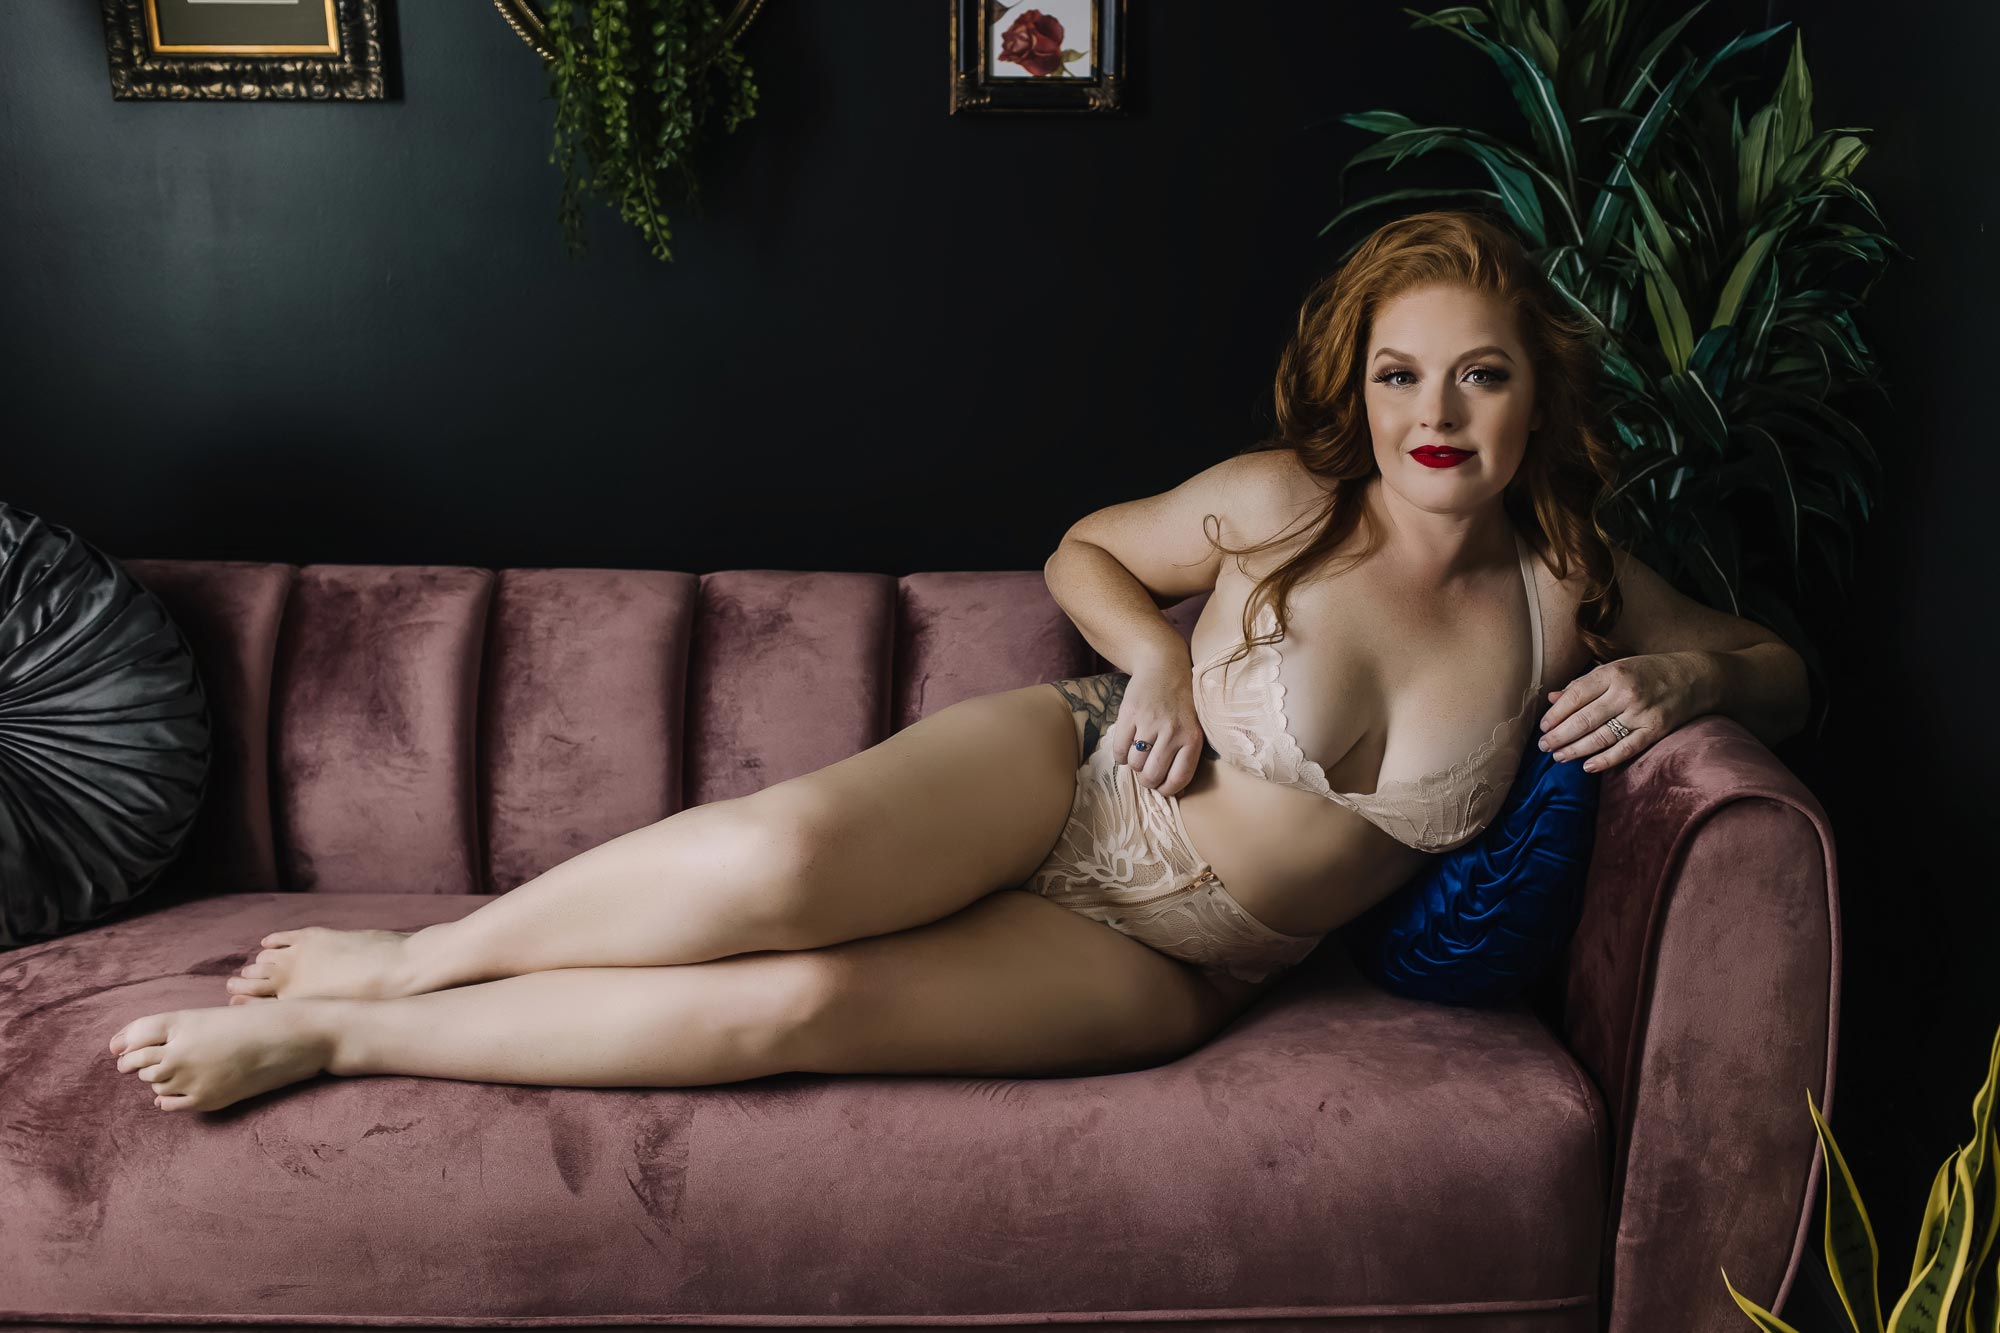 image of red head woman in lingerie on pink couch smiling at camera